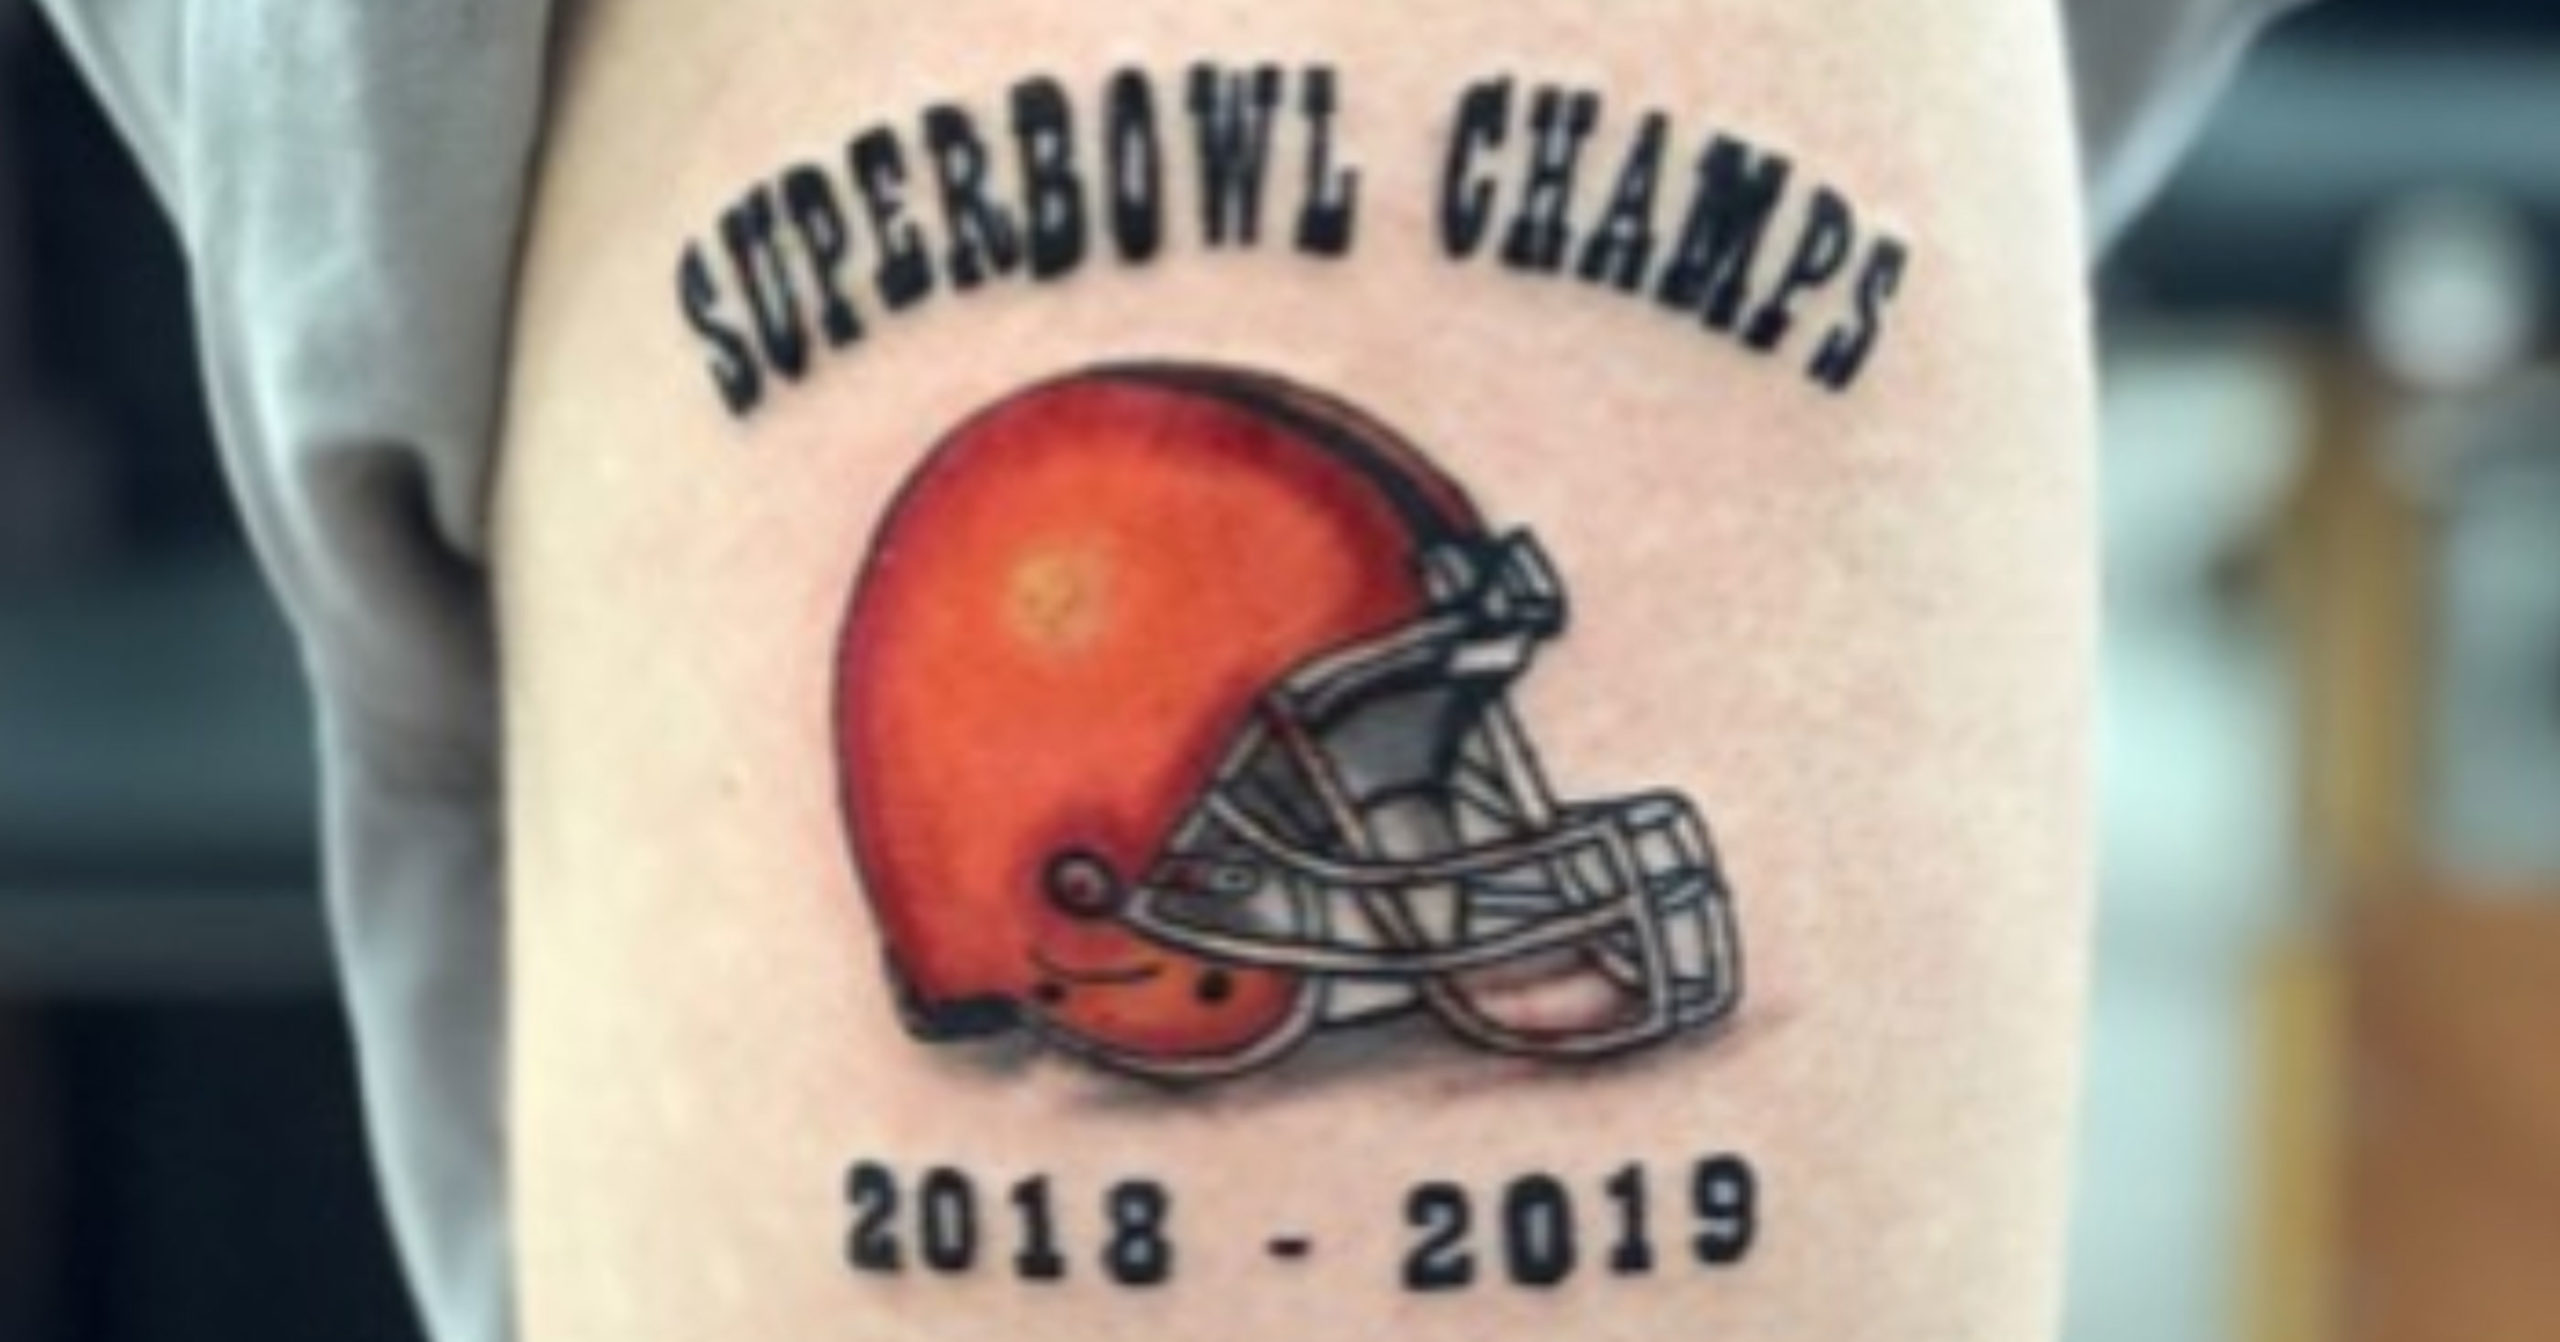 Fan Gets Cleveland Browns Super Bowl Champions Tattoo Ahead Of 2018-2019 Season